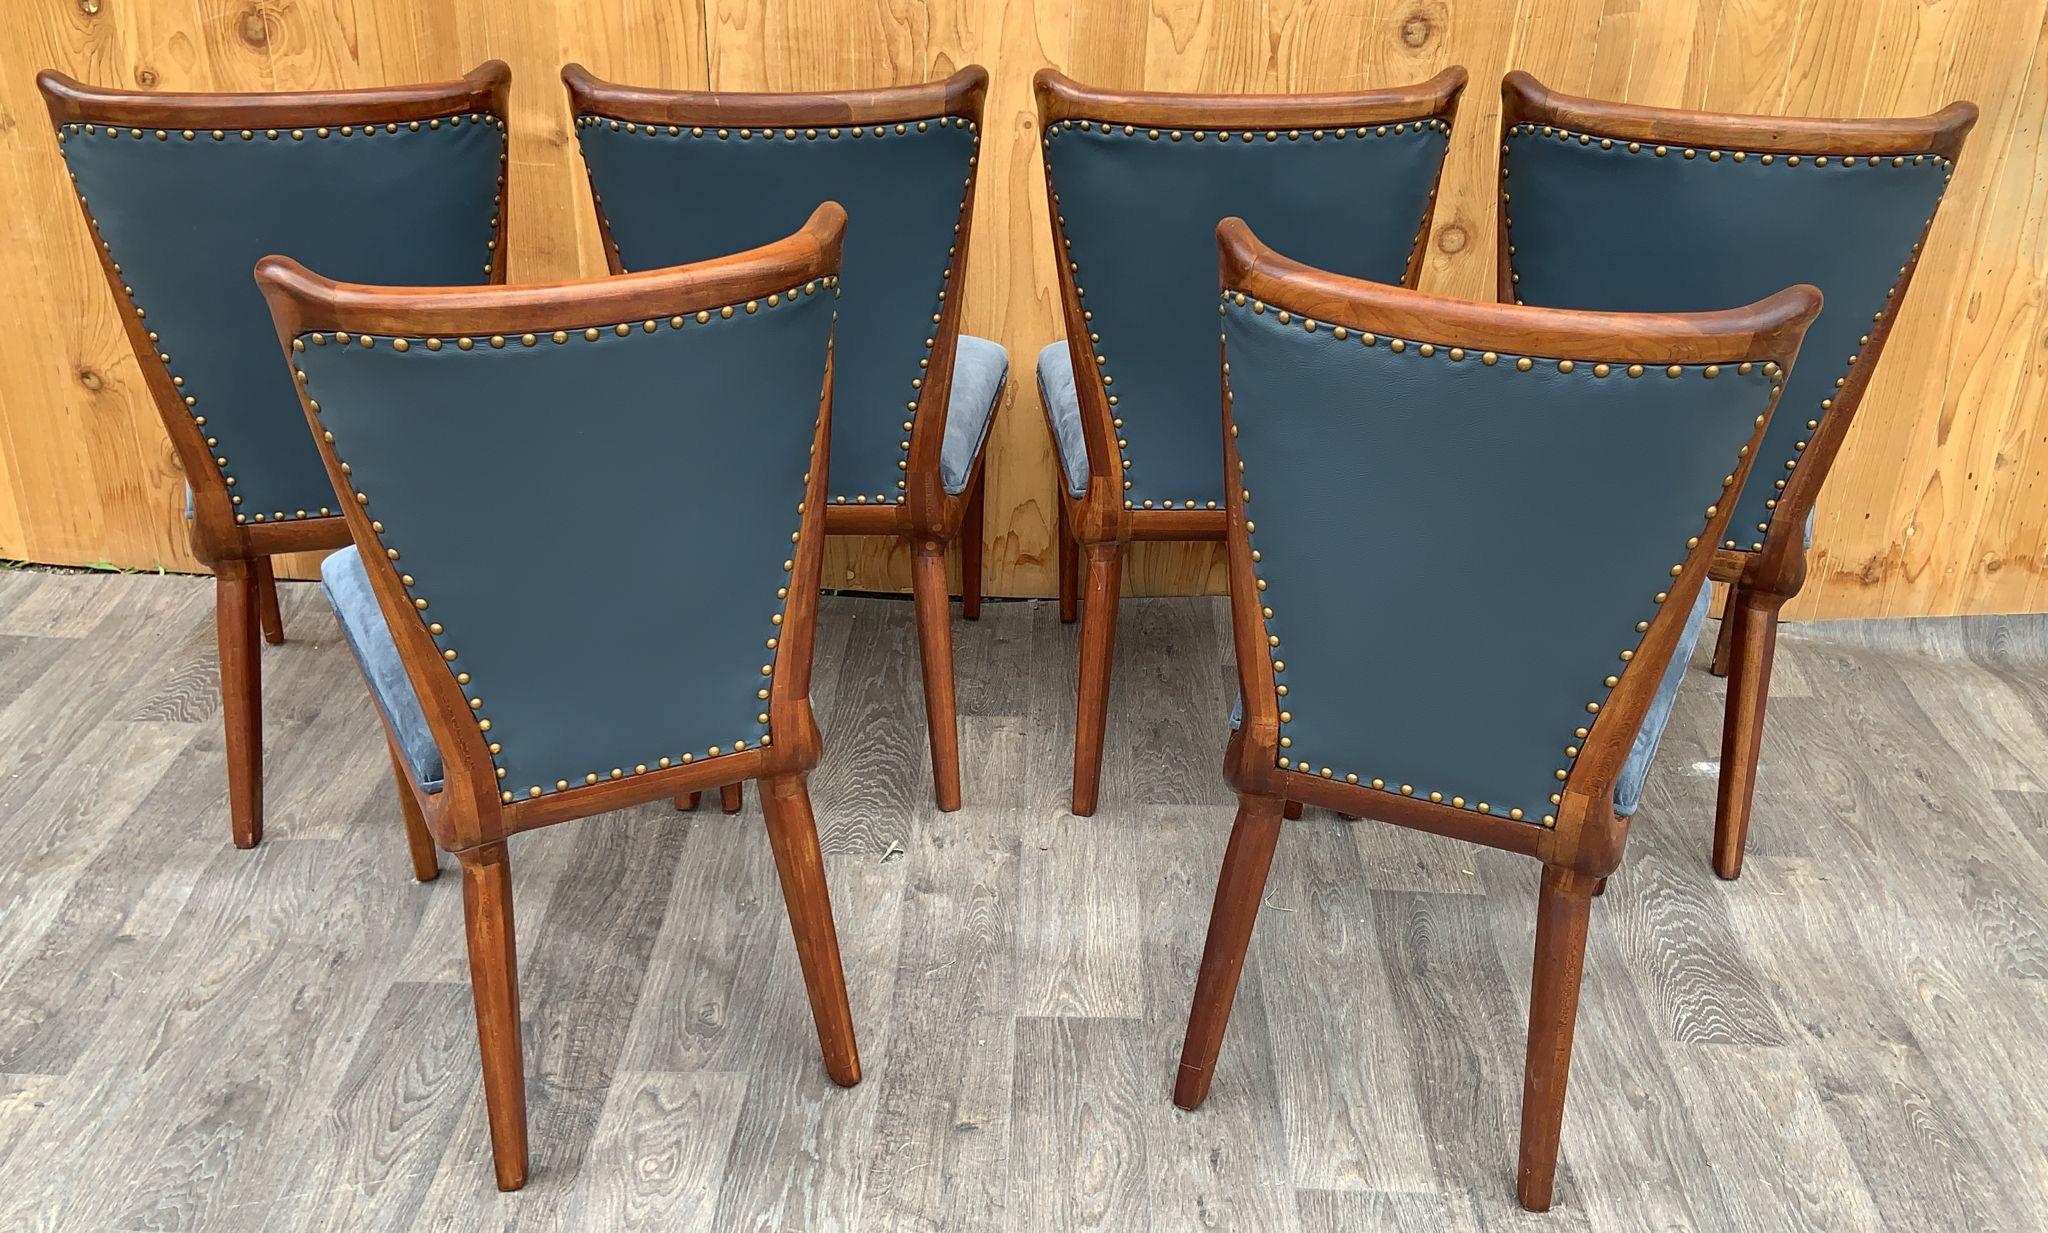 Art Deco Suede Sculptural Curved Back Dining Chairs Newly Upholstered - Set of 6 For Sale 3